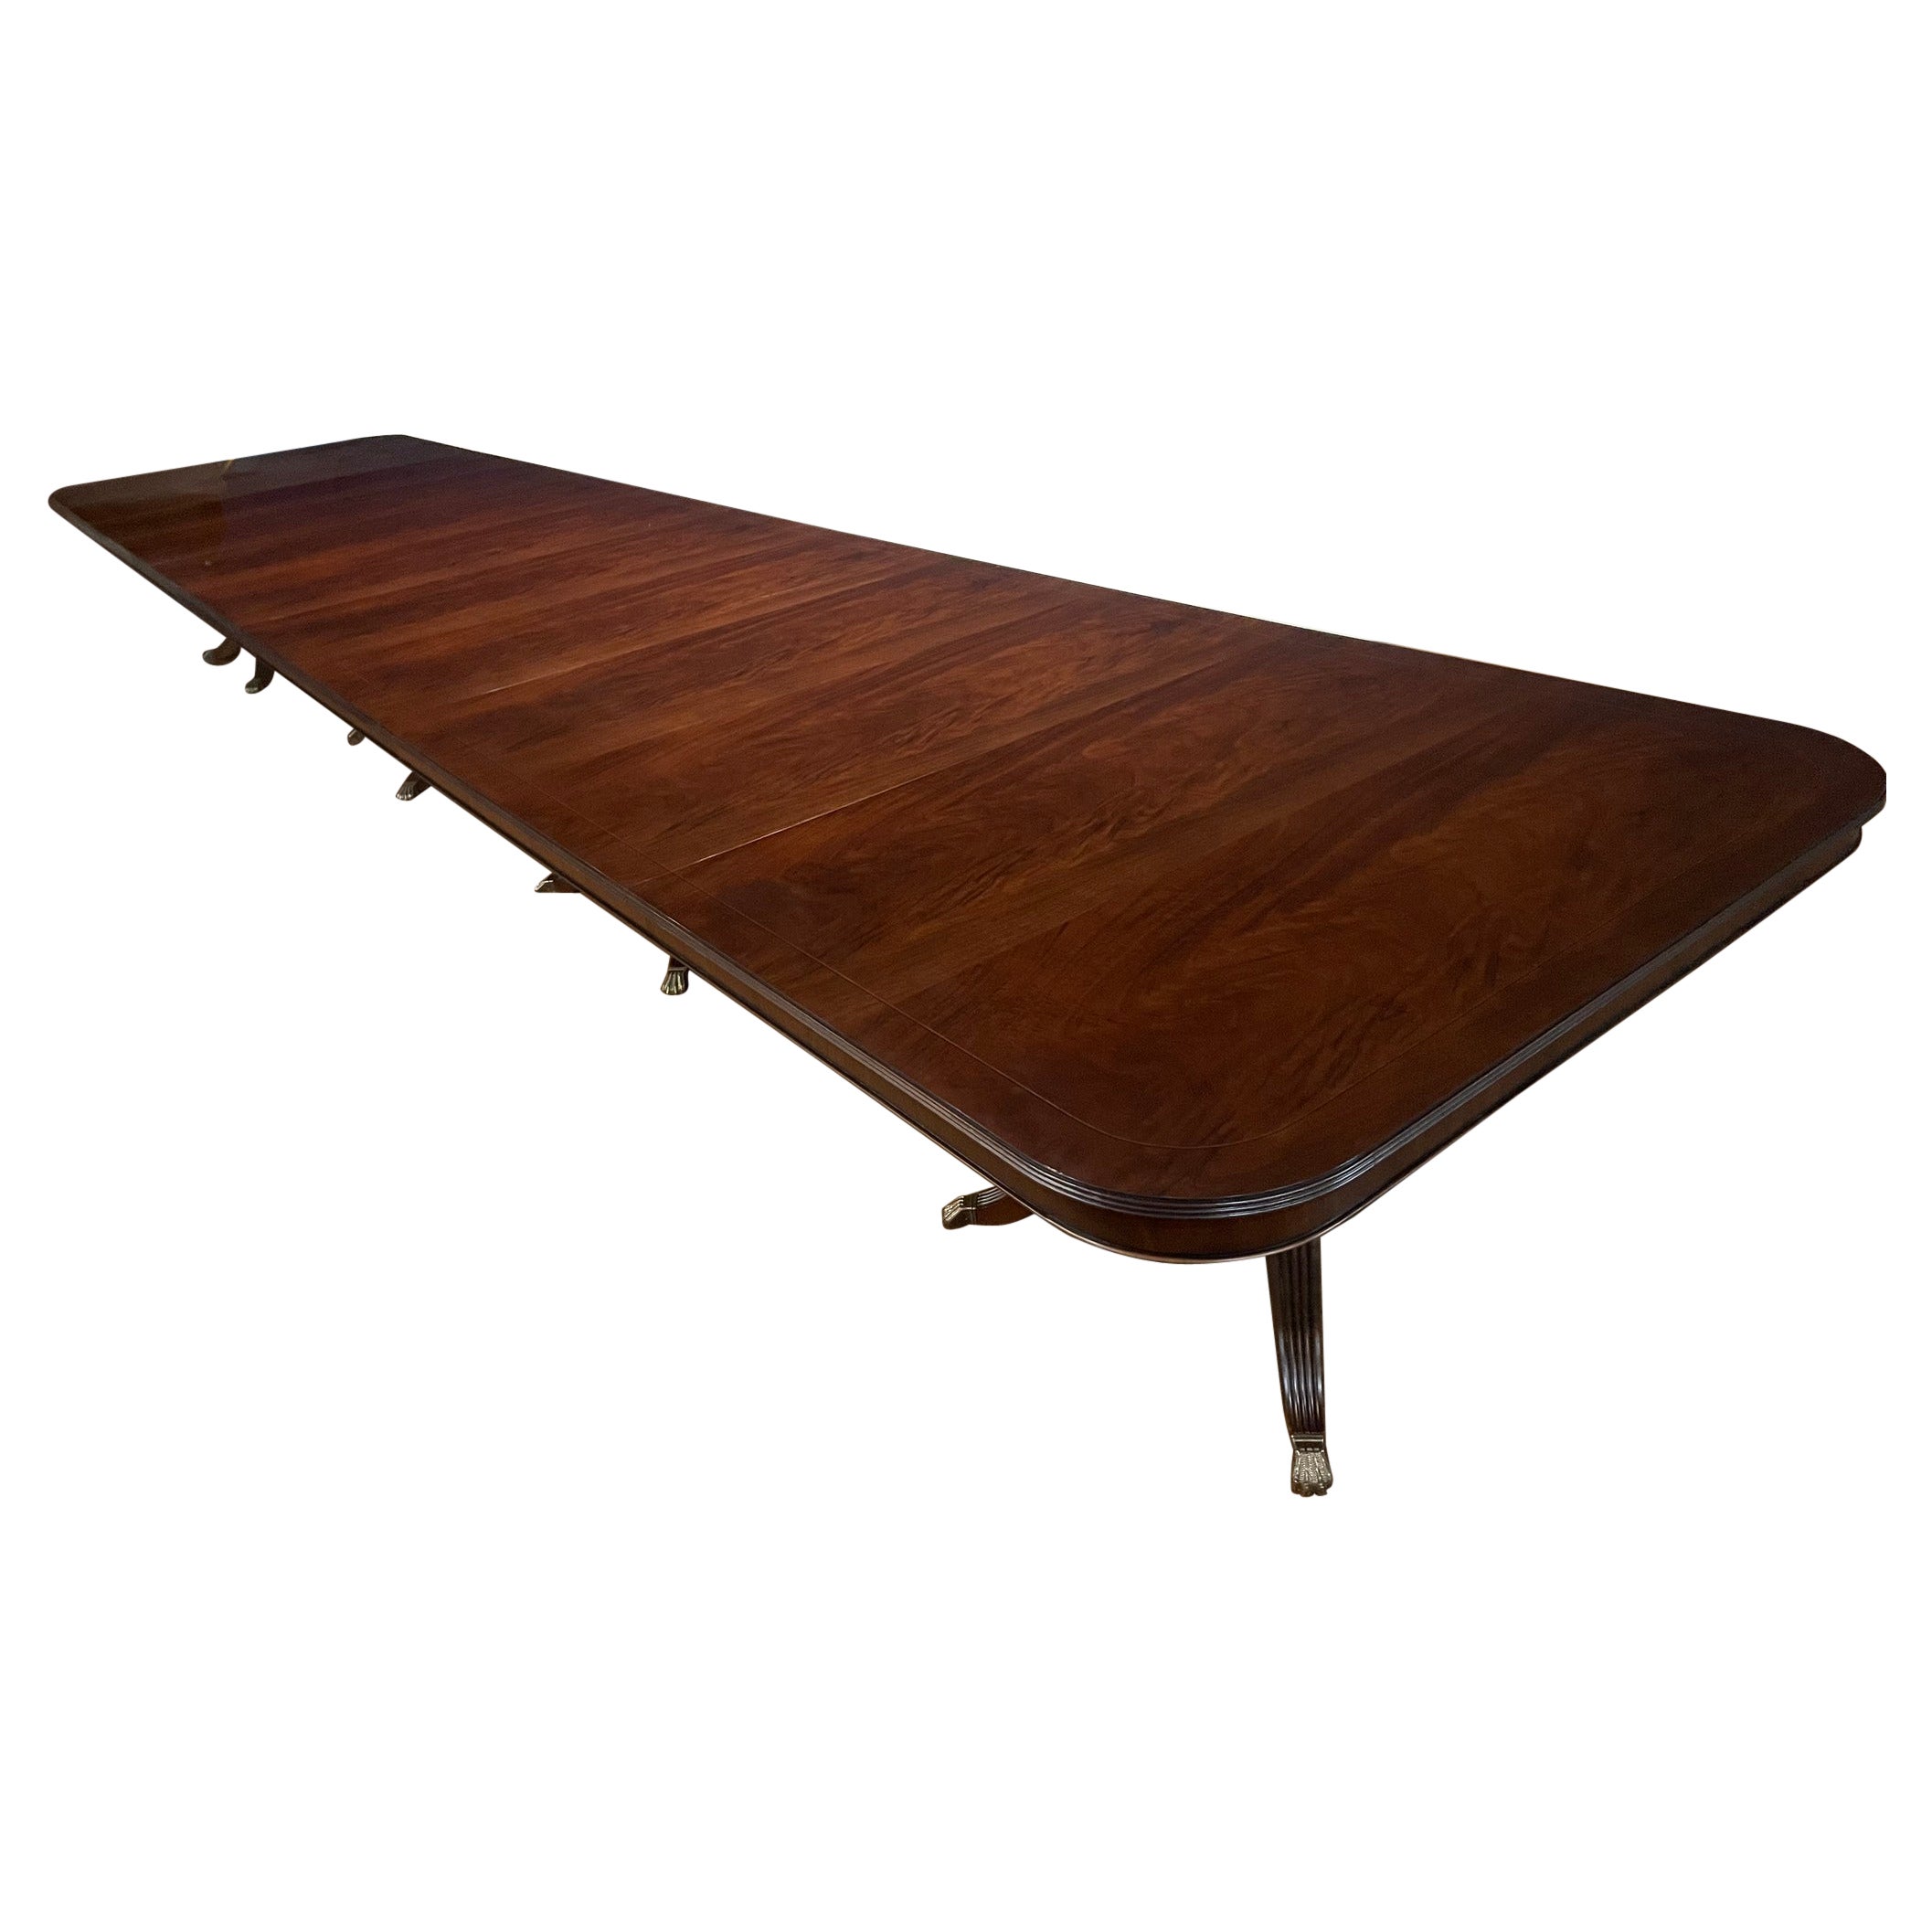 24 Ft. Crotch Mahogany Banquet Table For Sale